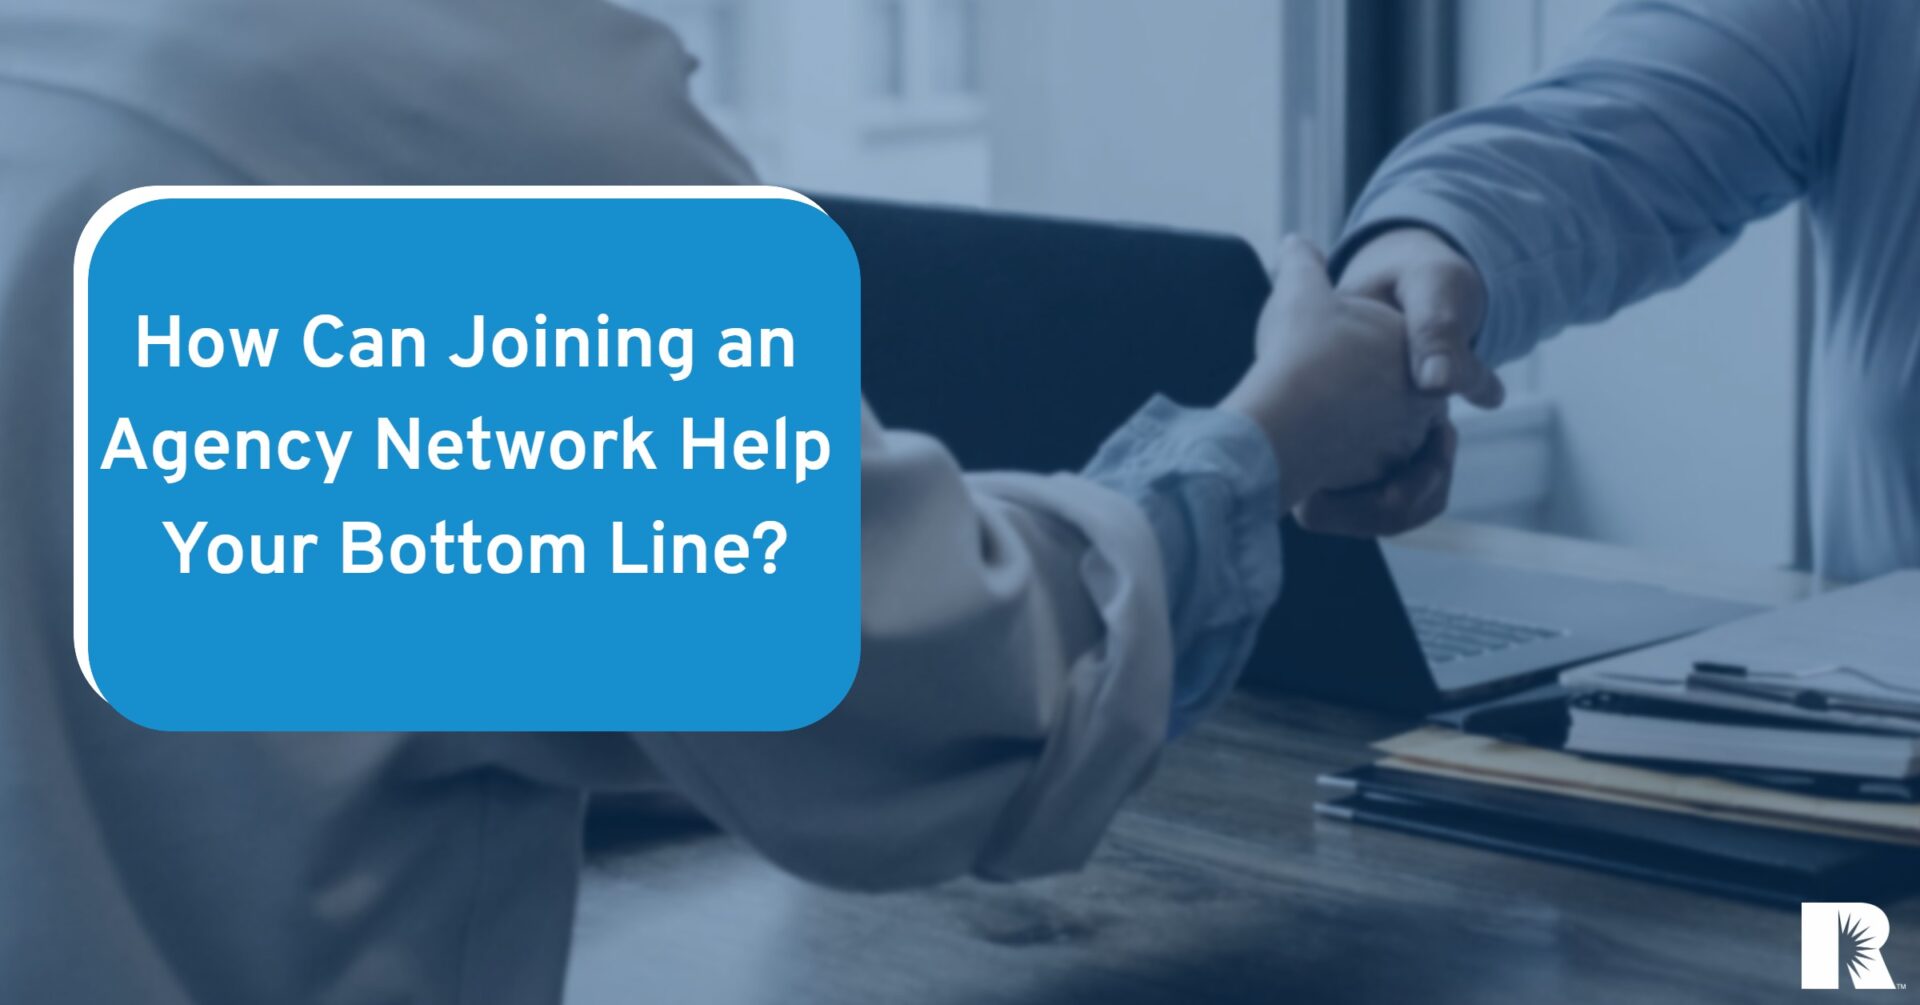 How Joining an Agency Network Impacts Your Bottom Line